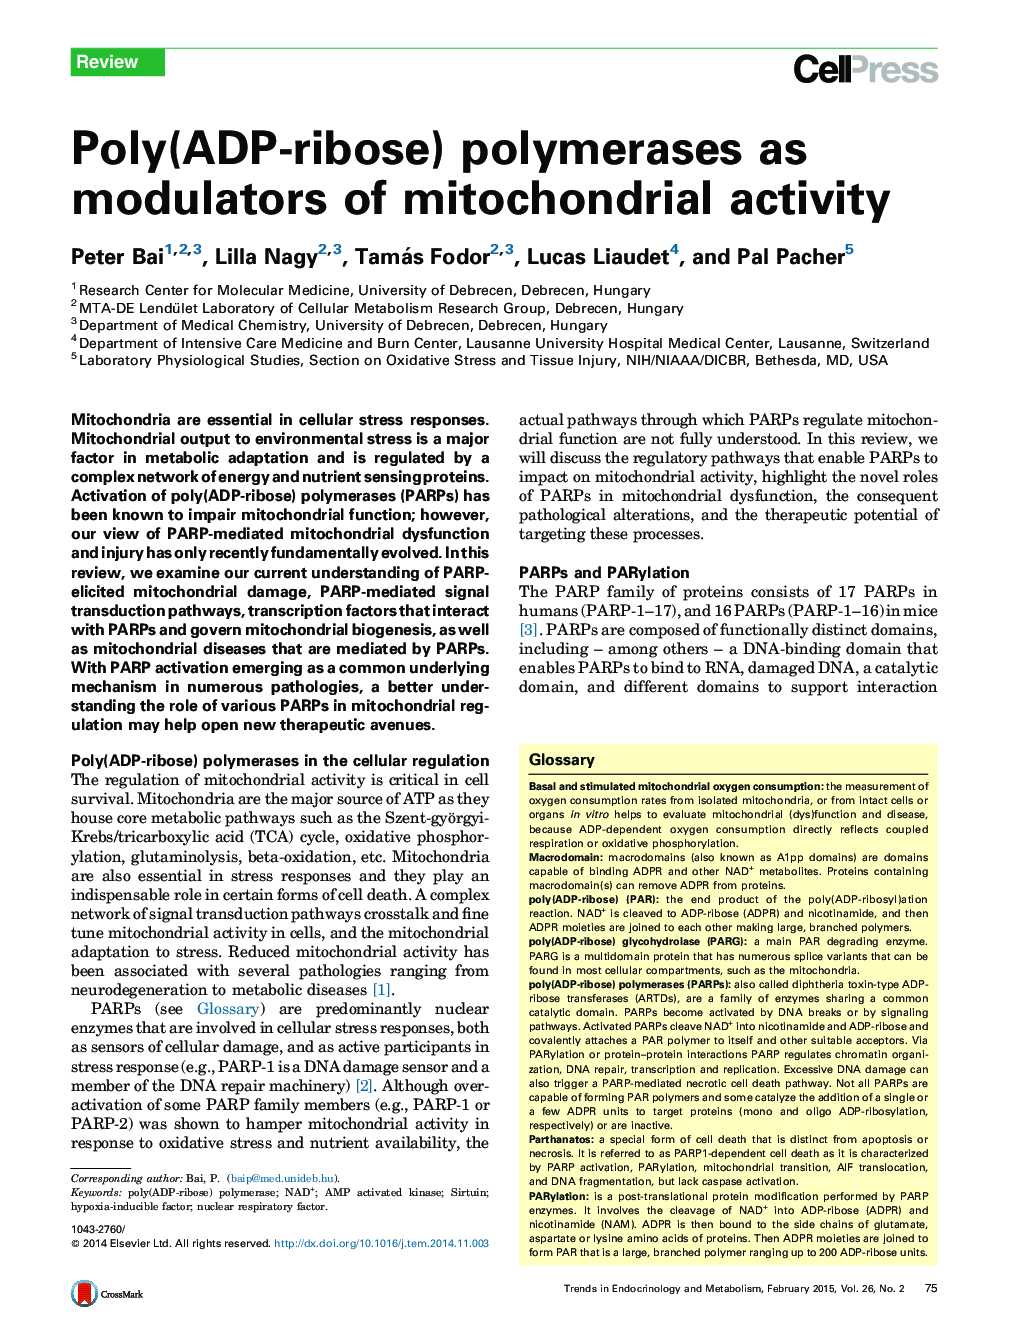 Poly(ADP-ribose) polymerases as modulators of mitochondrial activity